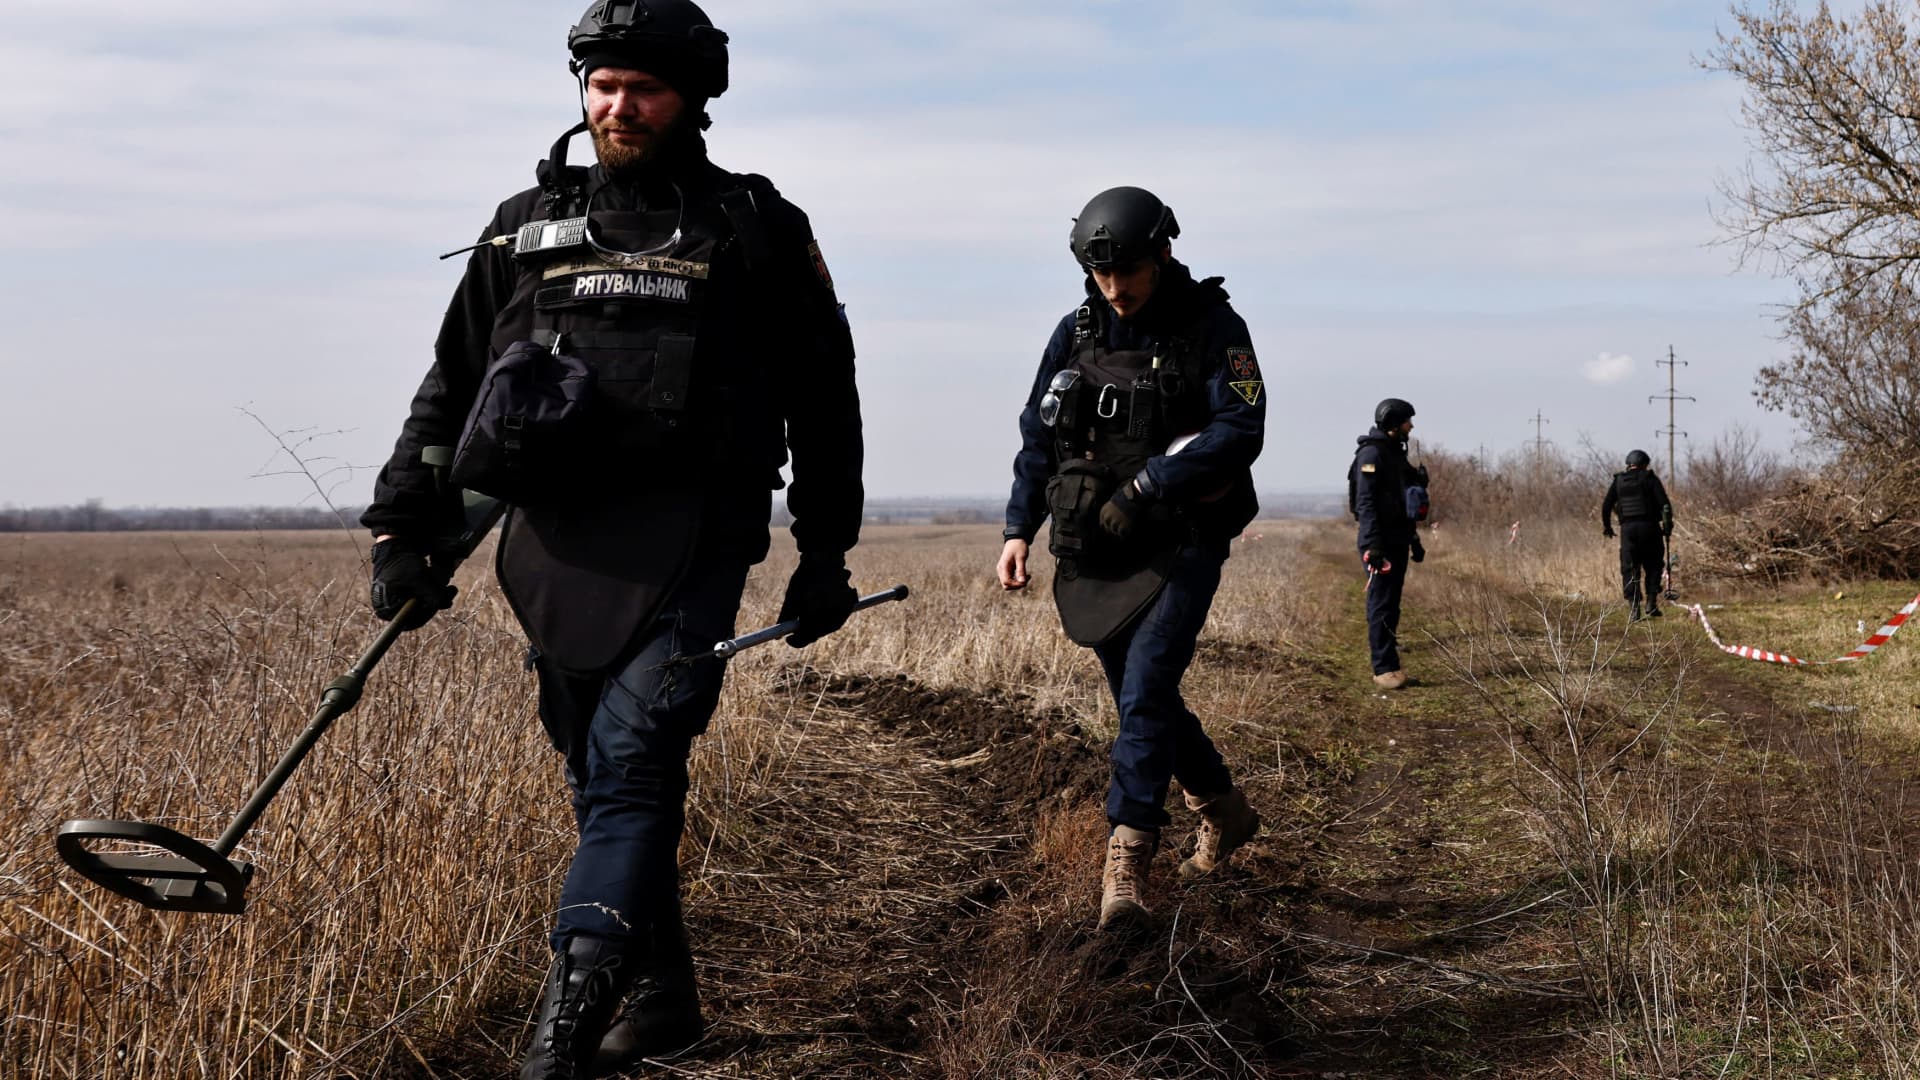 A member of the de-mining department of the Ukrainian Emergency Services prepares to survey an area of farmland and electric power lines for land mines and other unexploded ordnance for electricians to access power towers damaged by Russian strikes in order to repair them, in Korovii Yar, in the Eastern Donetsk region of Ukraine, on March 20, 2023.